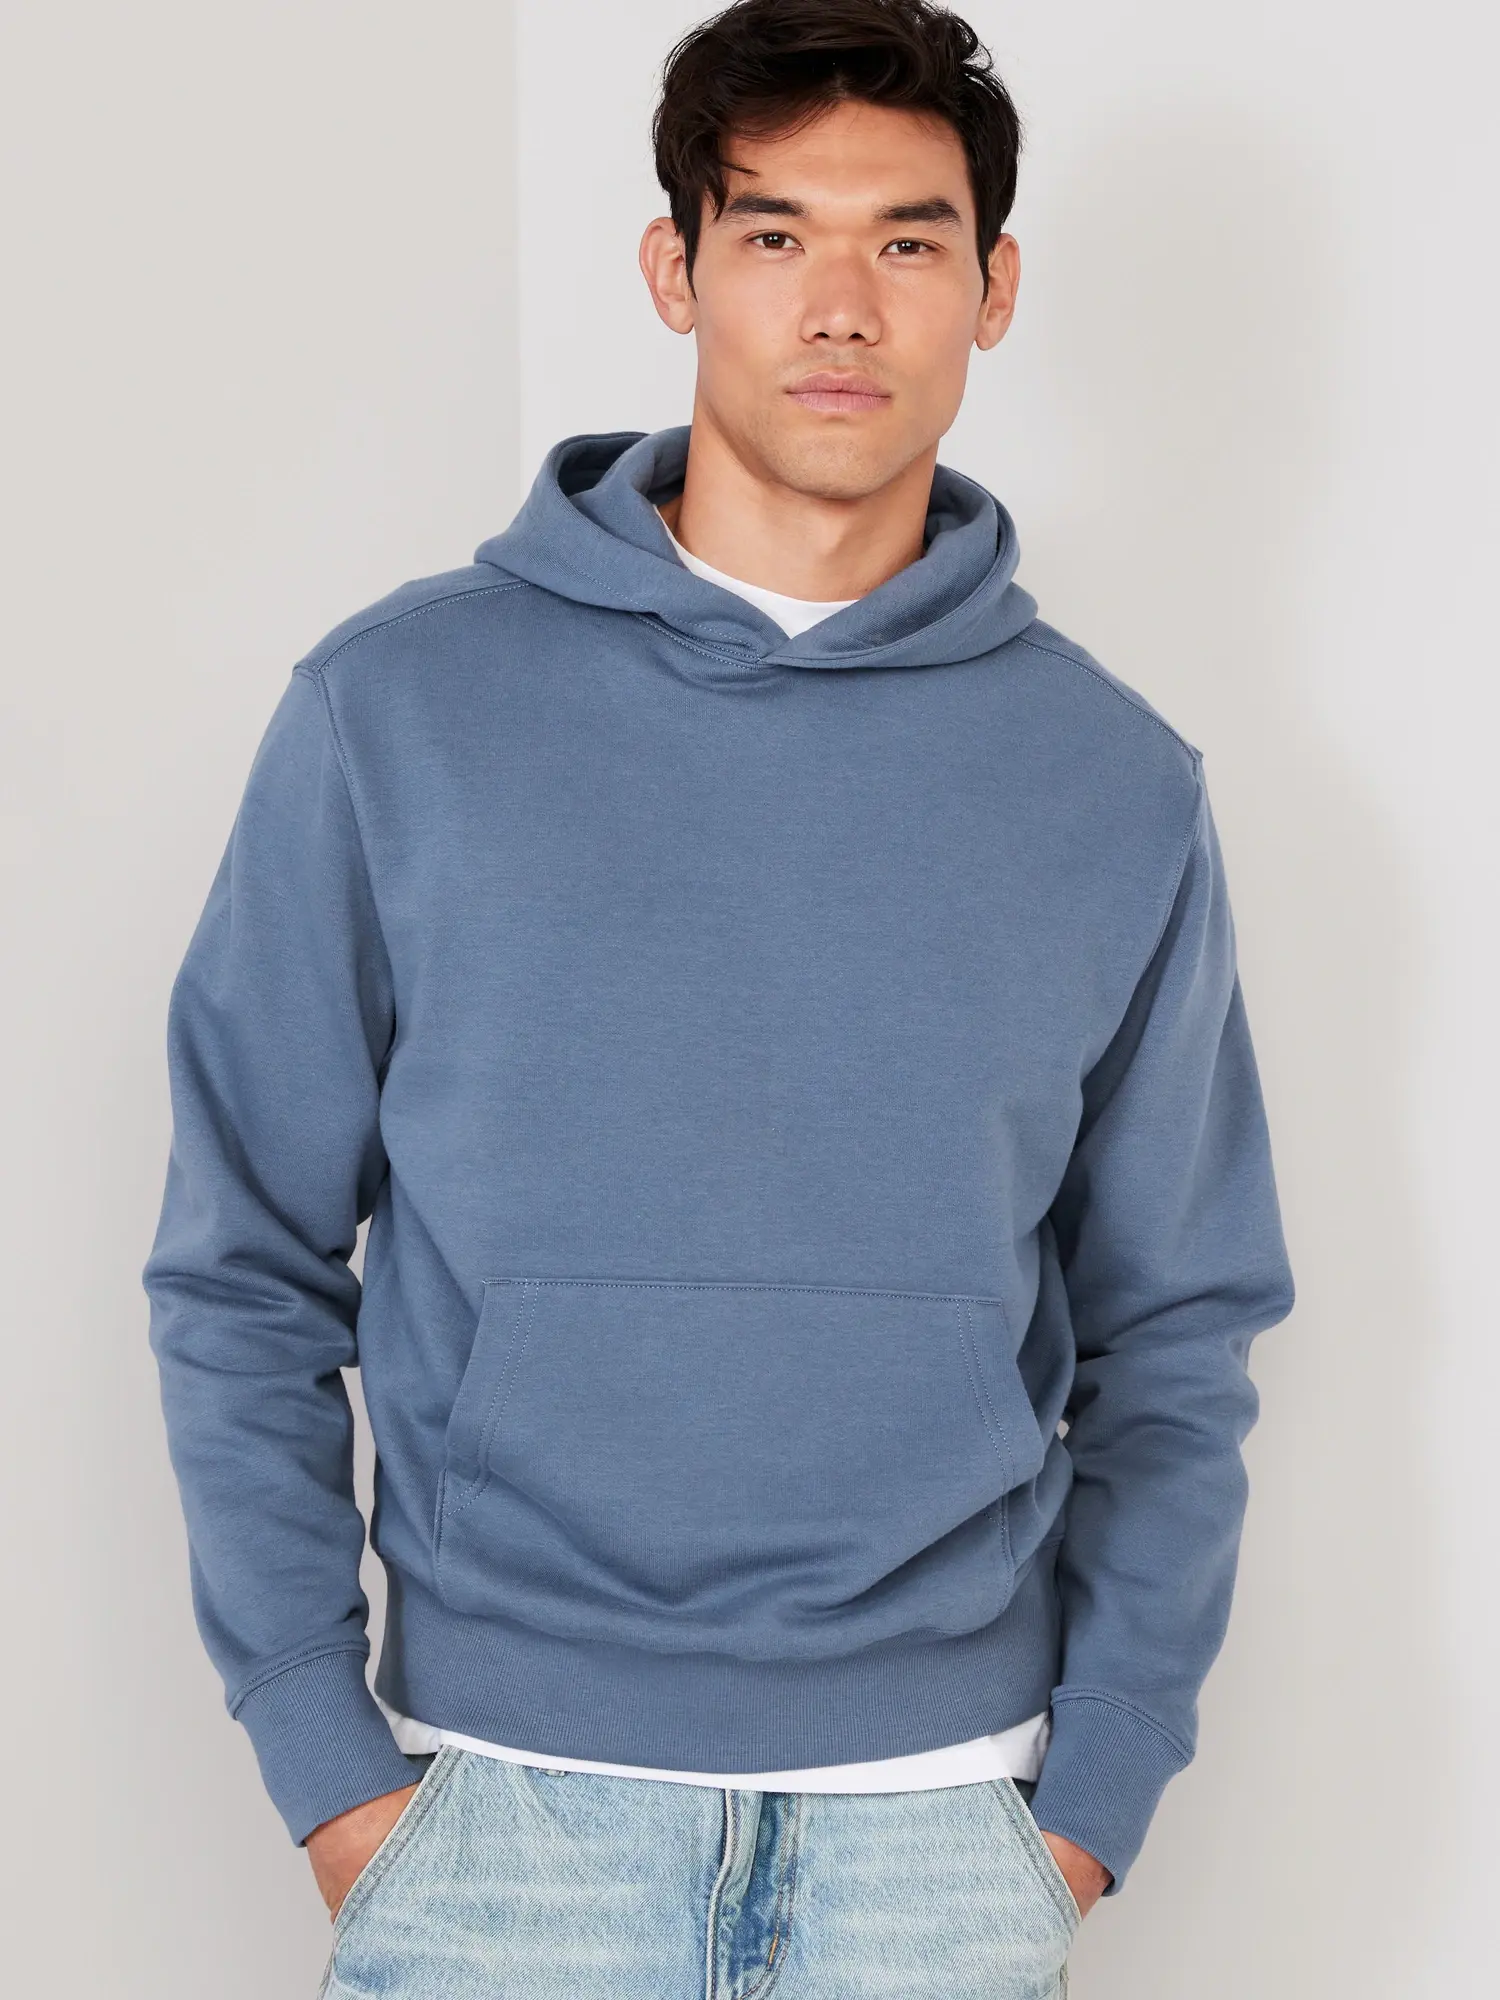 Old Navy Pullover Hoodie for Men blue. 1